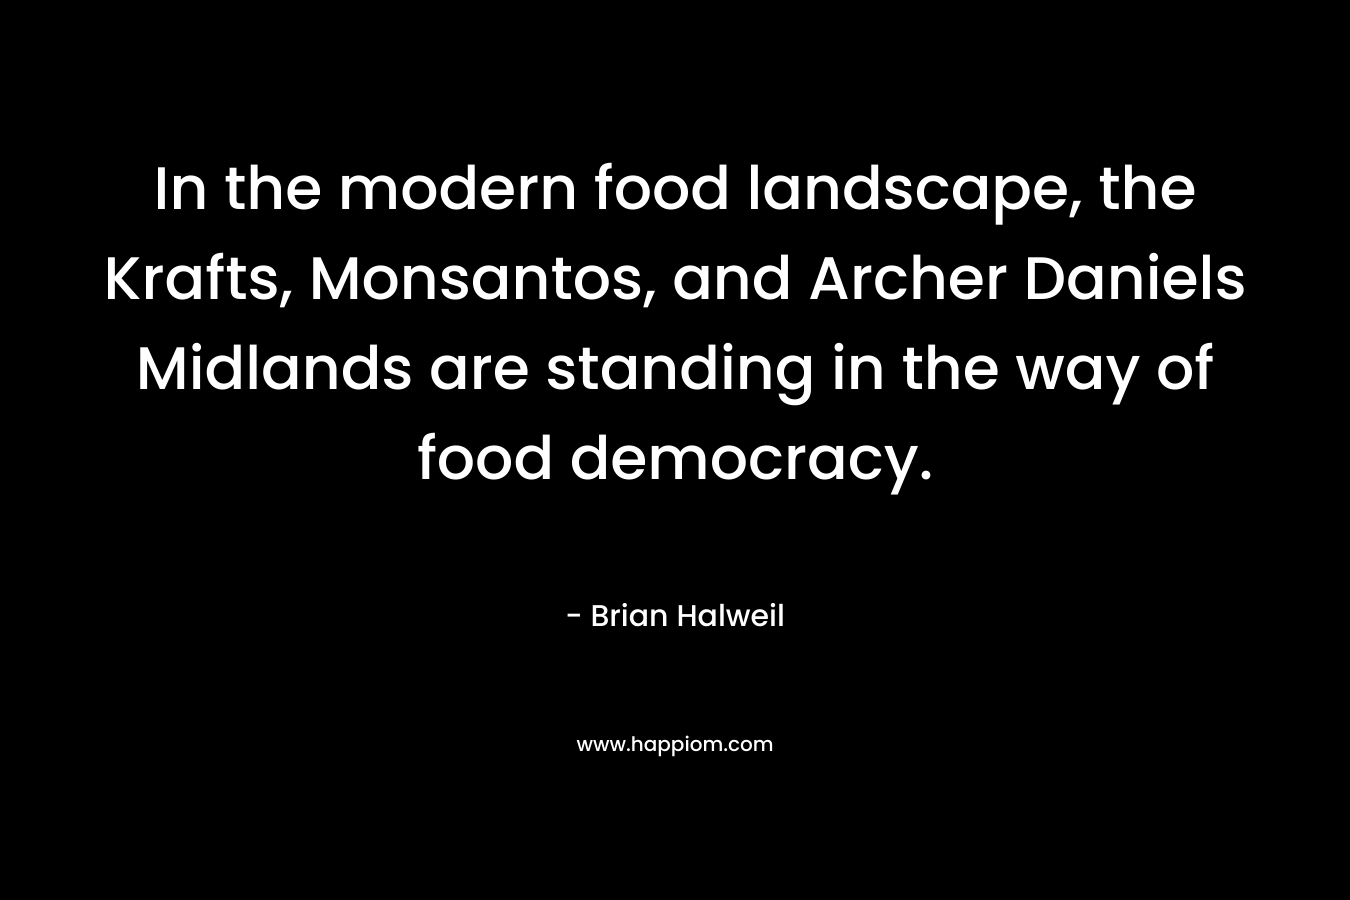 In the modern food landscape, the Krafts, Monsantos, and Archer Daniels Midlands are standing in the way of food democracy. – Brian Halweil